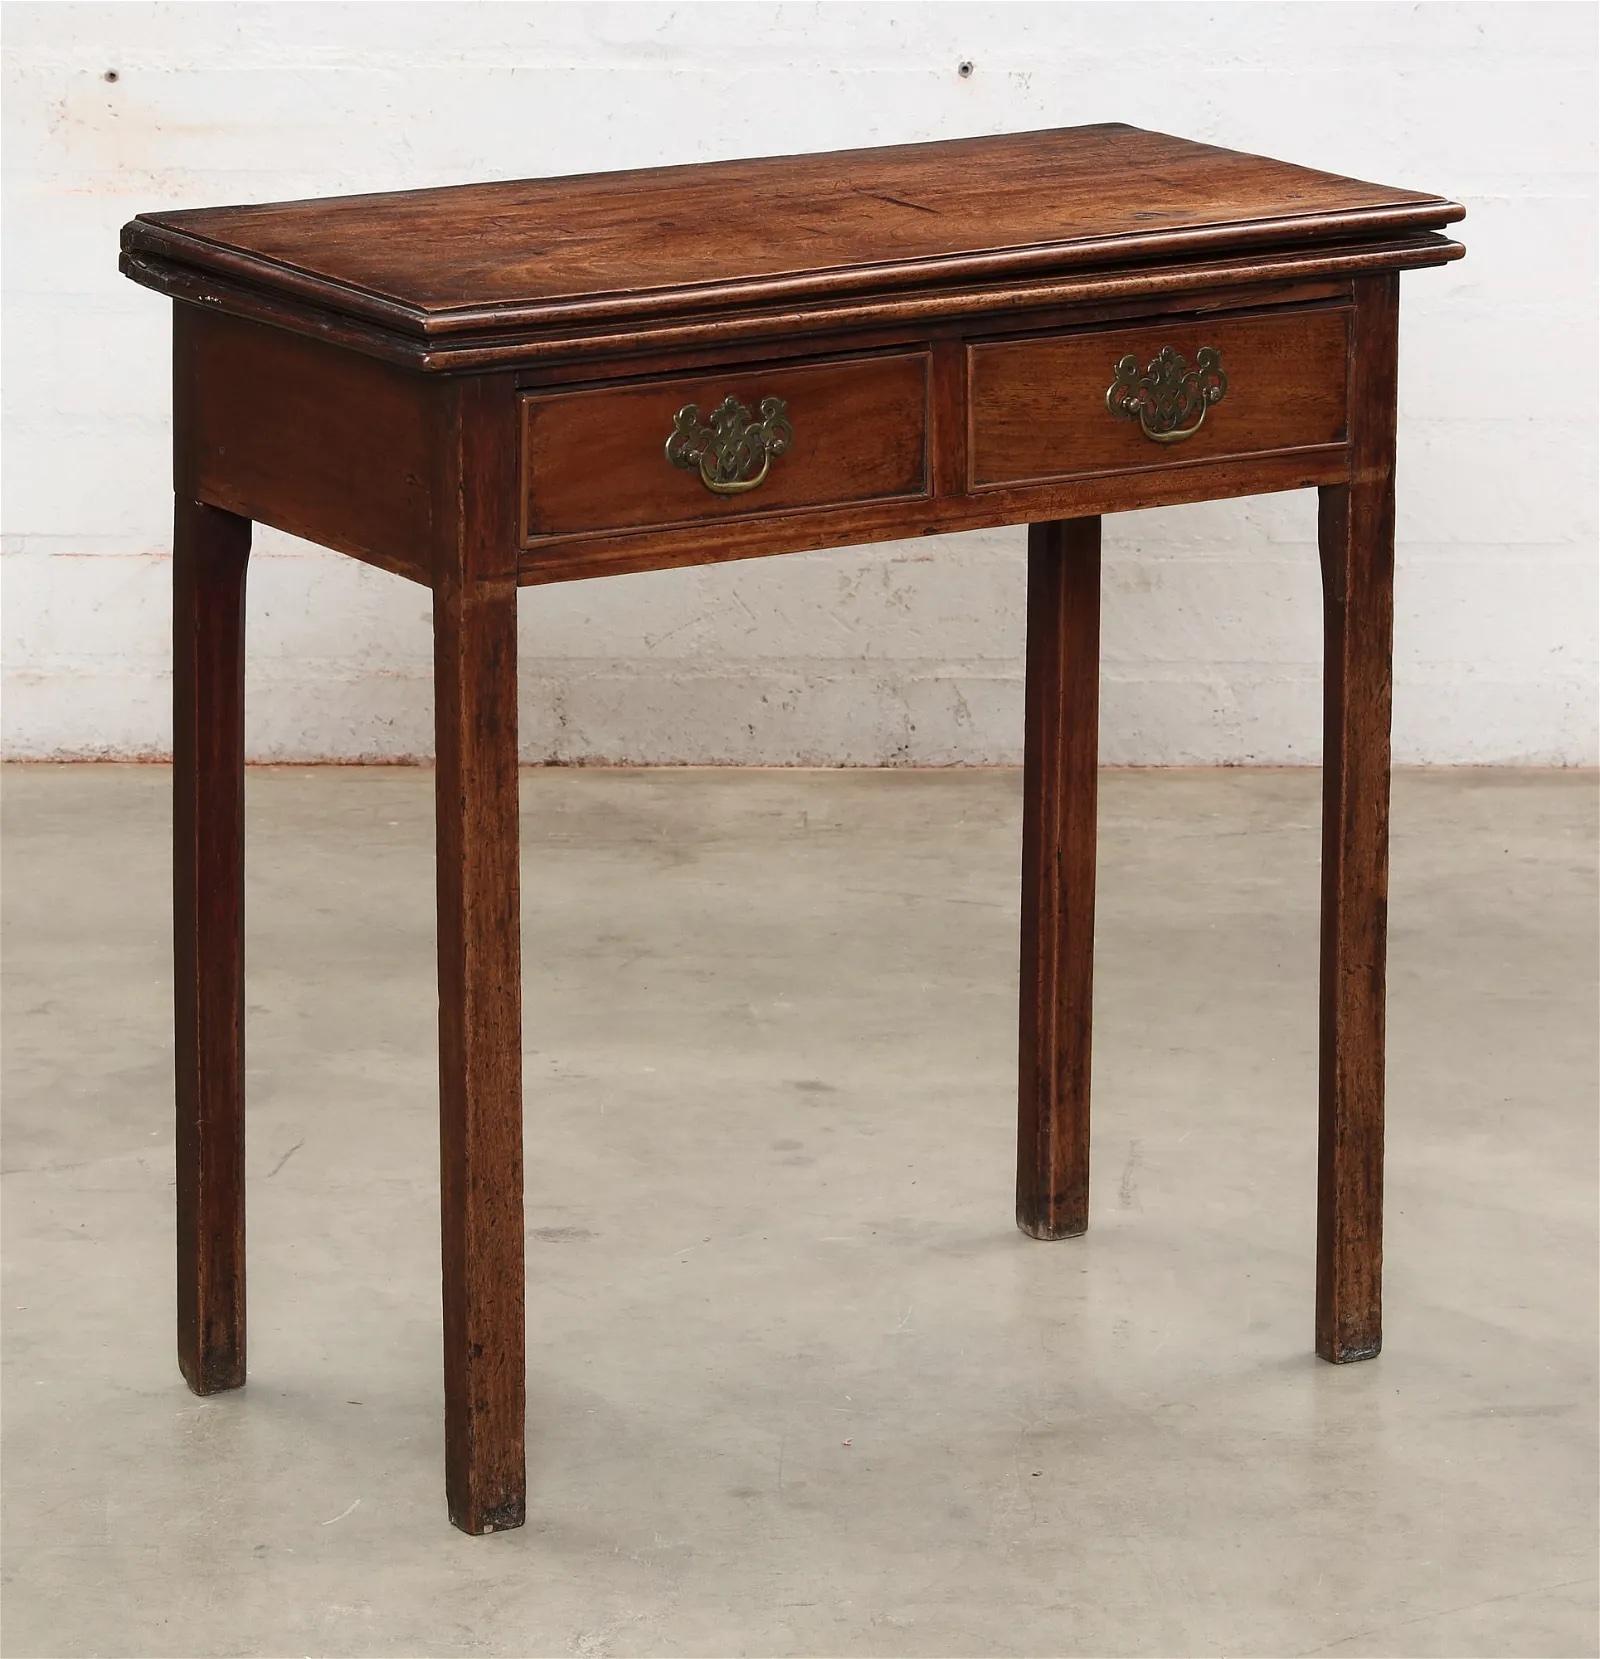 A George III mahogany fold over card table - late 18th century. Left rear leg acts as a gateleg to swing to the rear to support fold over table top leaf. Closed Dimensions: height 28